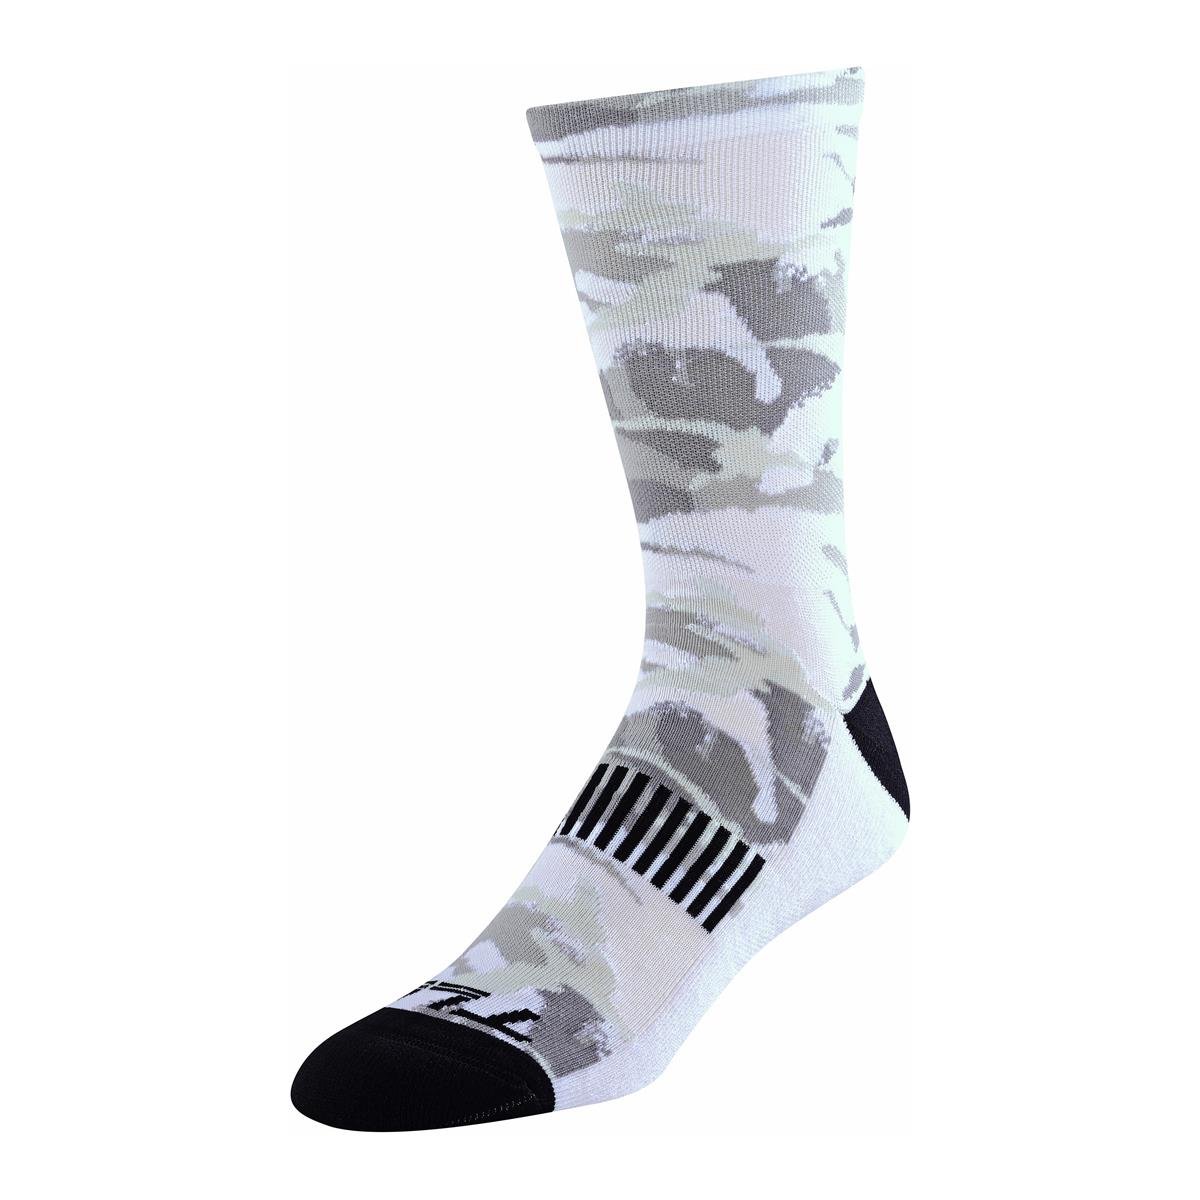 Troy Lee Designs Chausettes Signature Performance Camo Cement